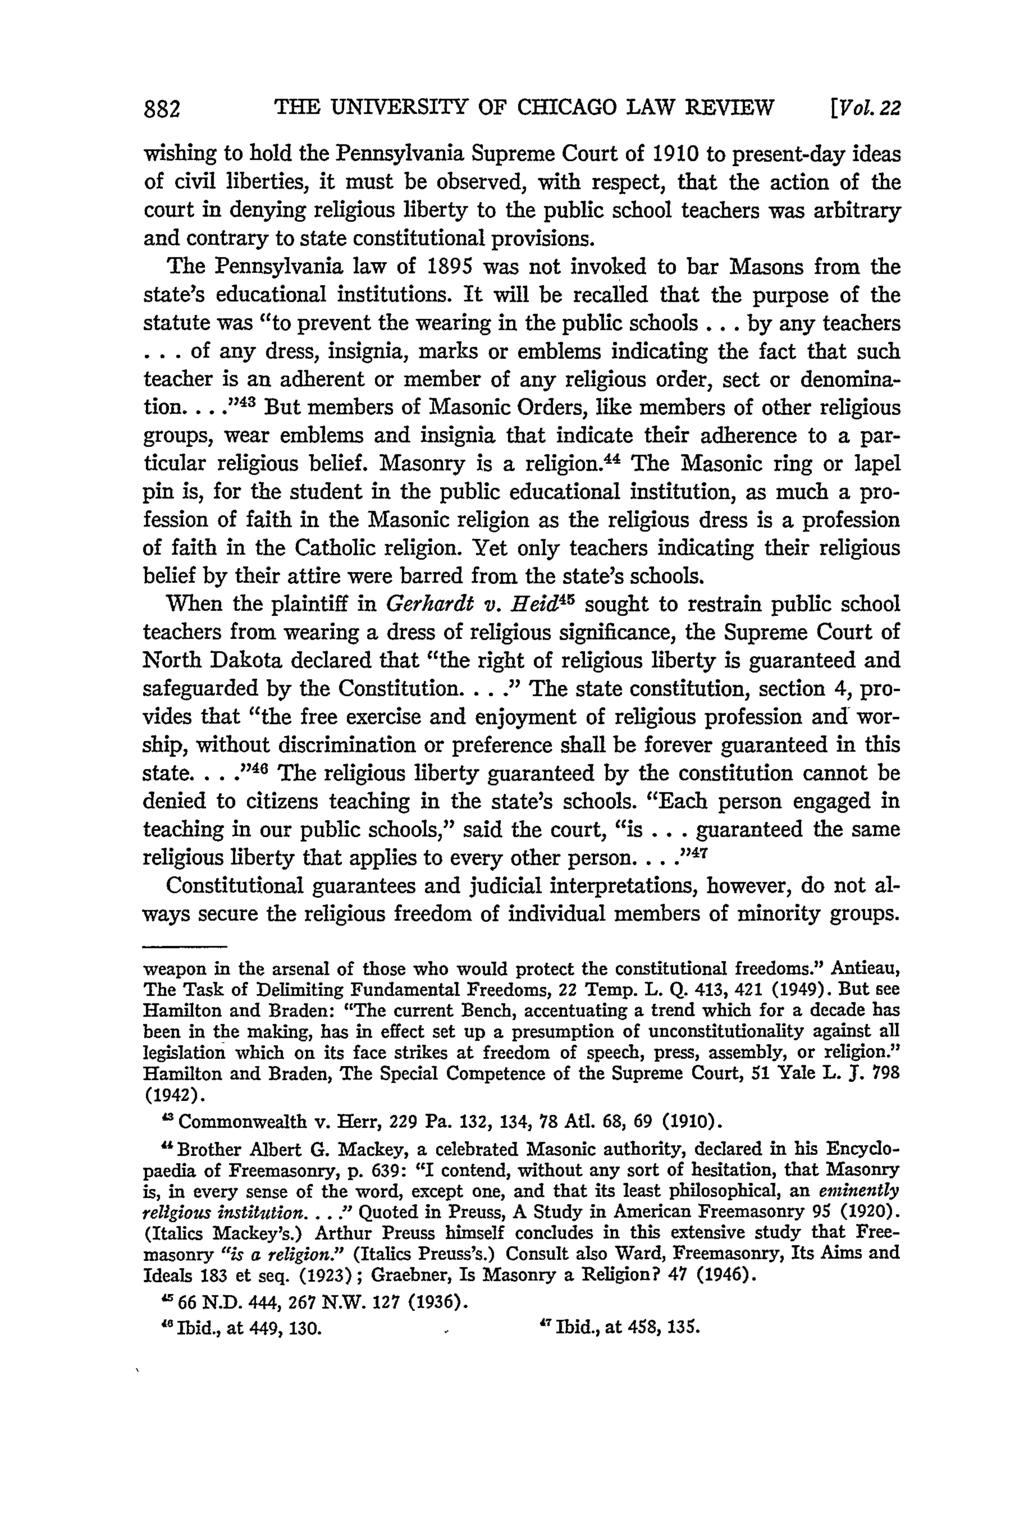 THE UNIVERSITY OF CHICAGO LAW REVIEW [Vol 22 wishing to hold the Pennsylvania Supreme Court of 1910 to present-day ideas of civil liberties, it must be observed, with respect, that the action of the